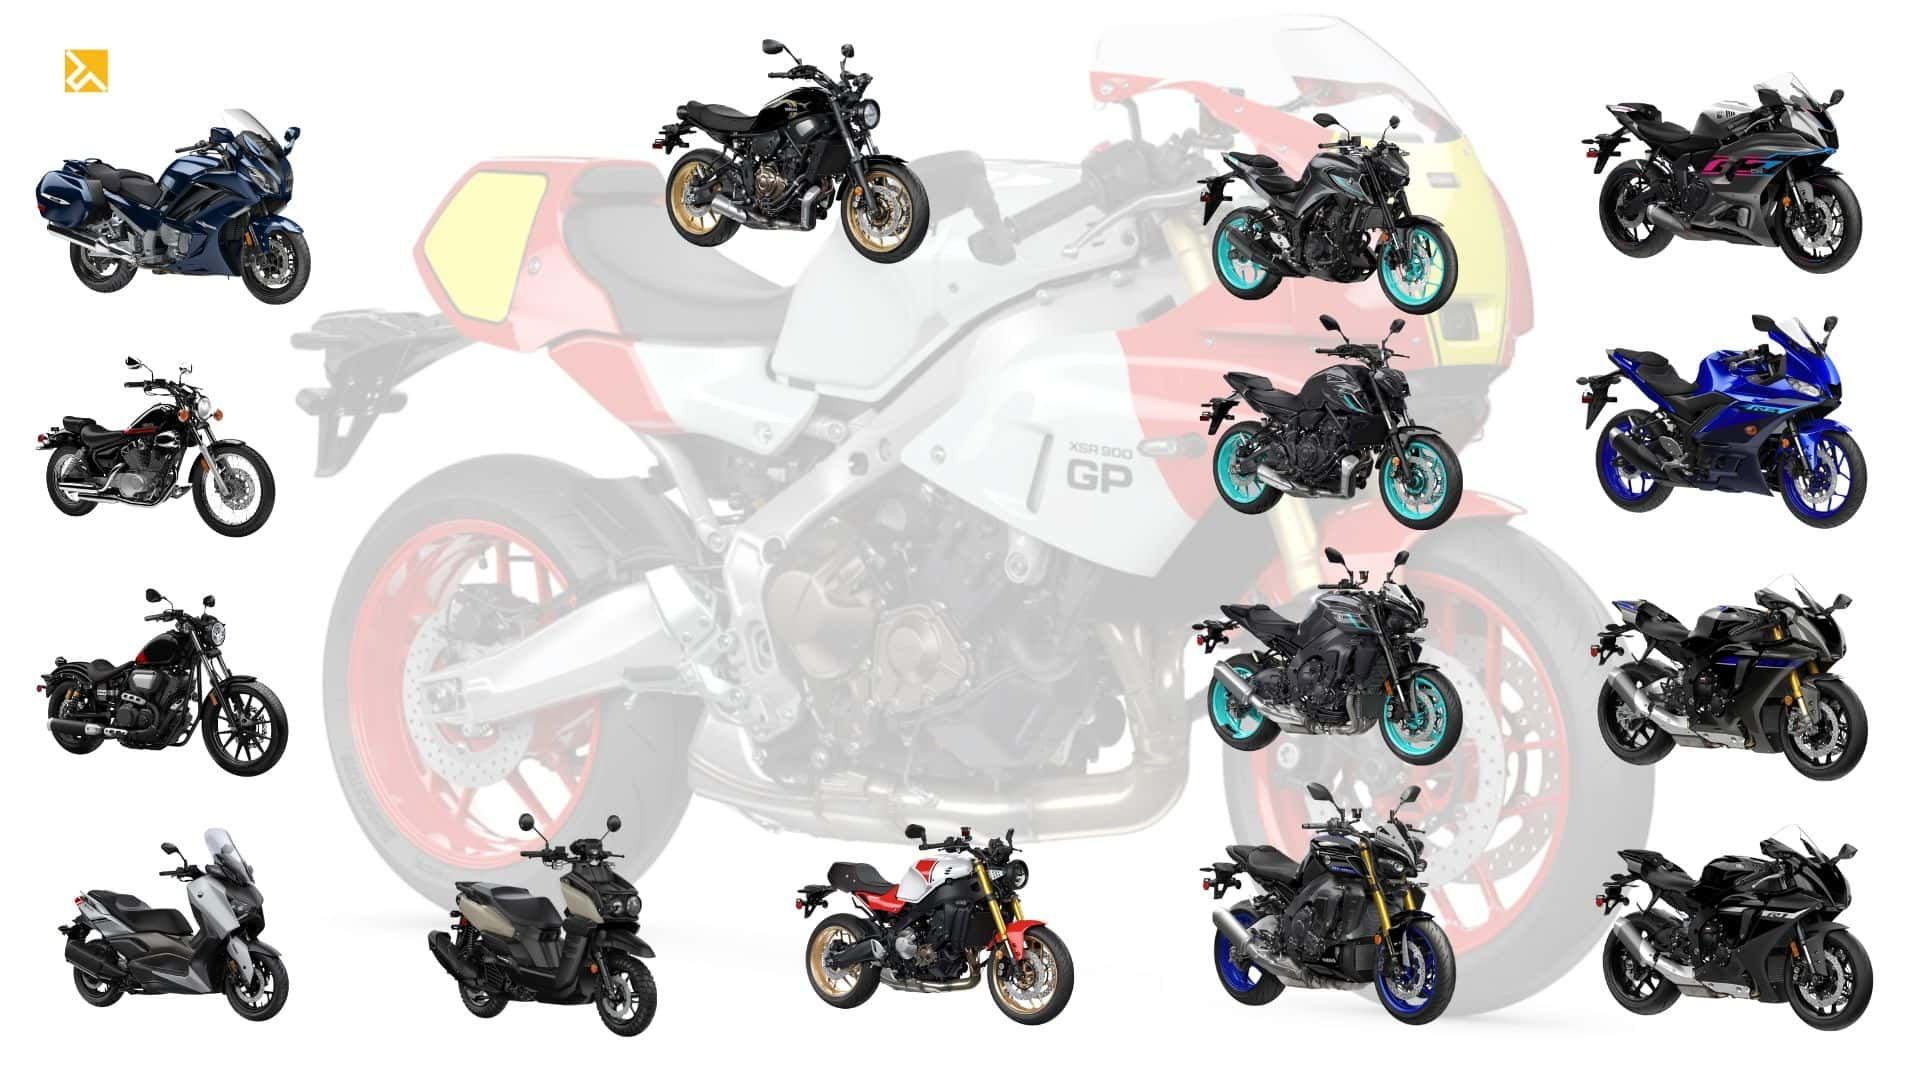 Can You See What's Missing From The 2024 Yamaha Lineup?